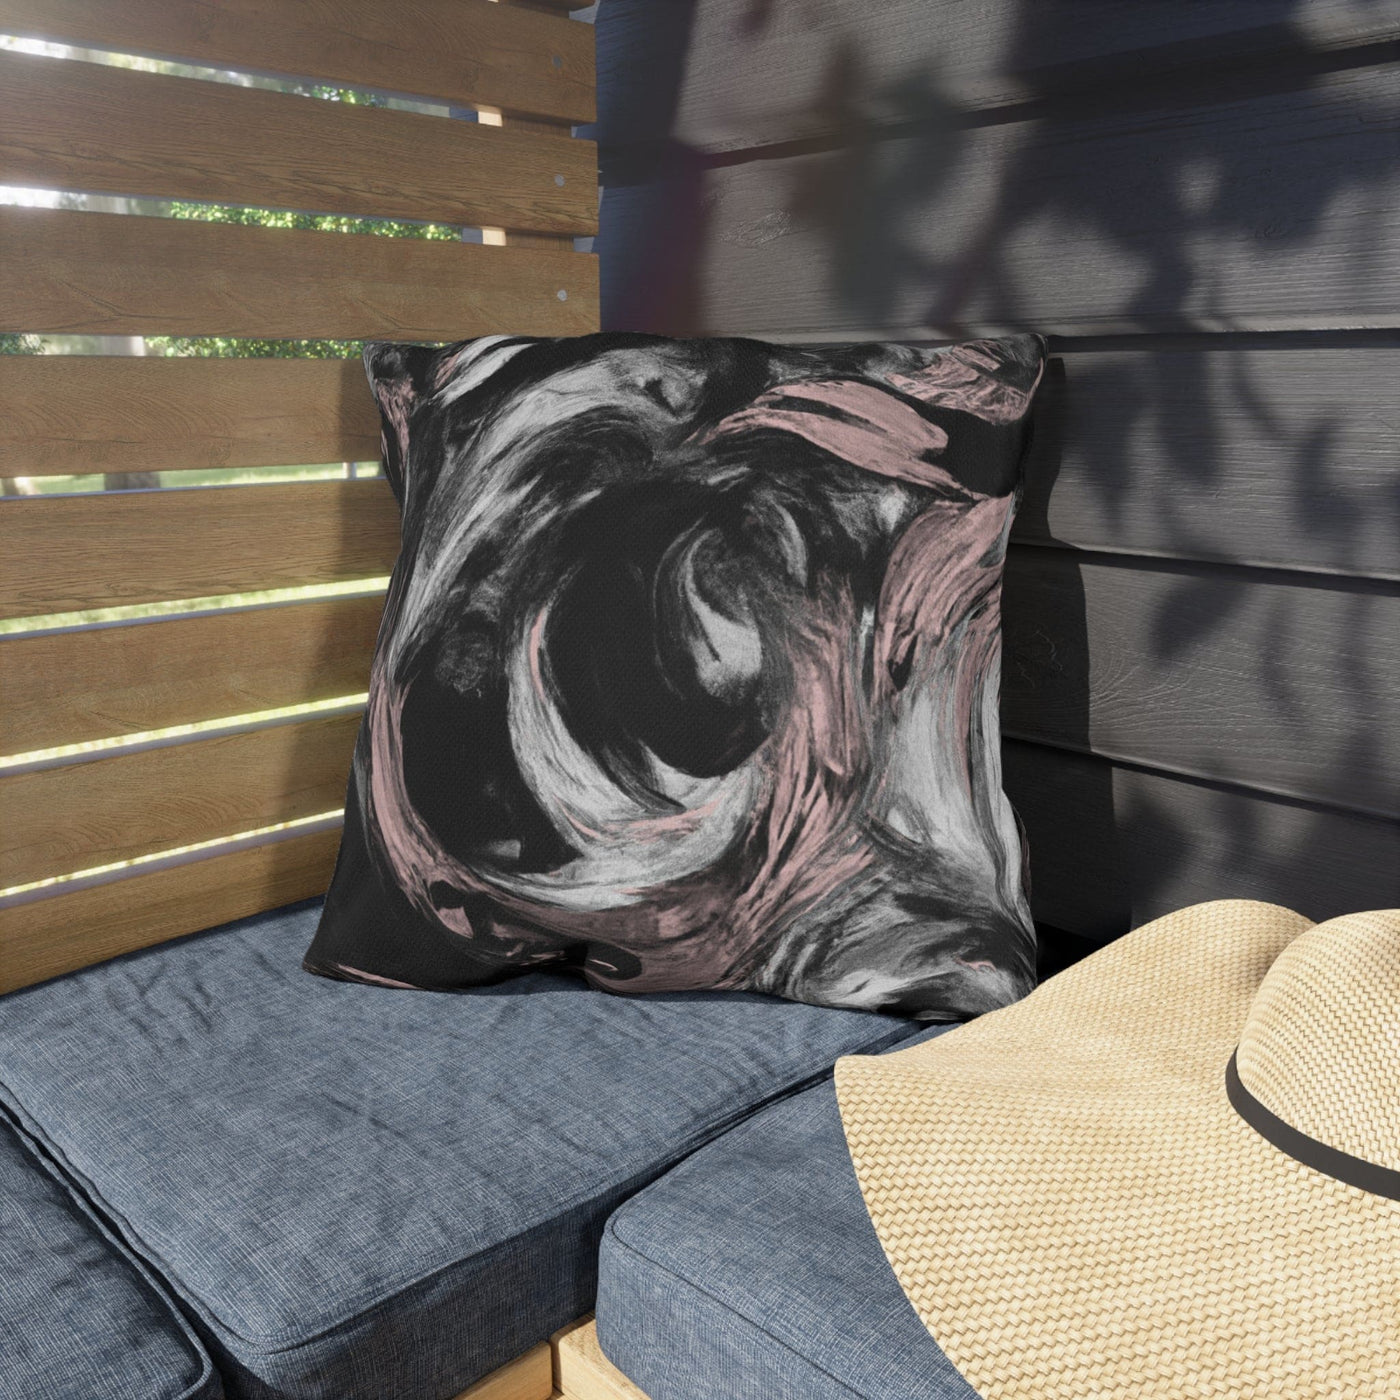 Decorative Outdoor Pillows With Zipper - Set Of 2 Black Pink White Abstract